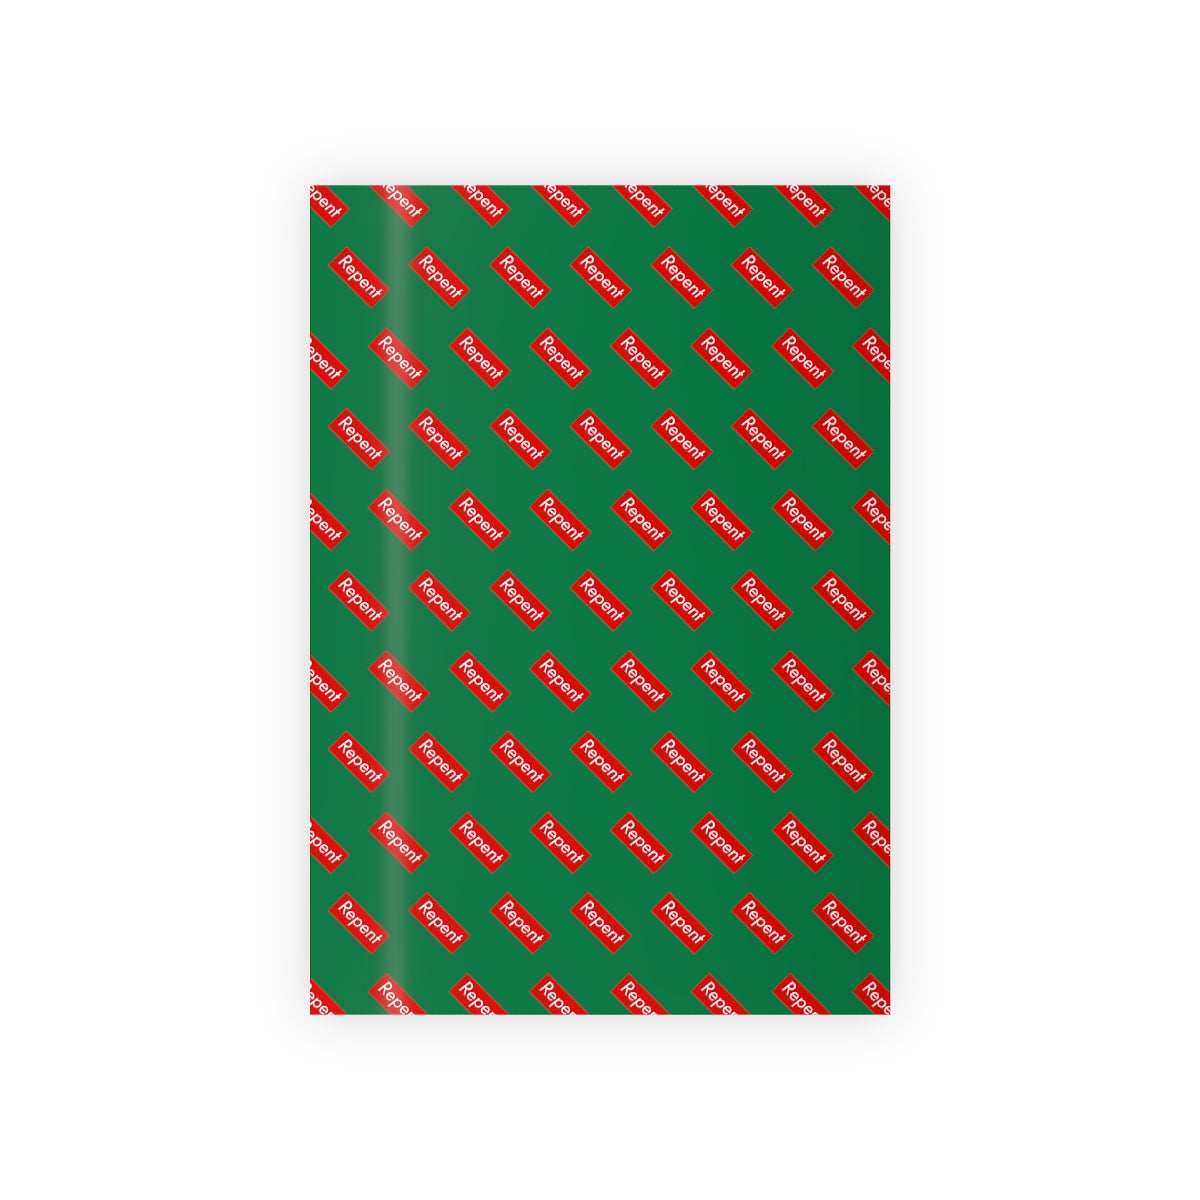 Repent Christmas Gift Wrapping Paper